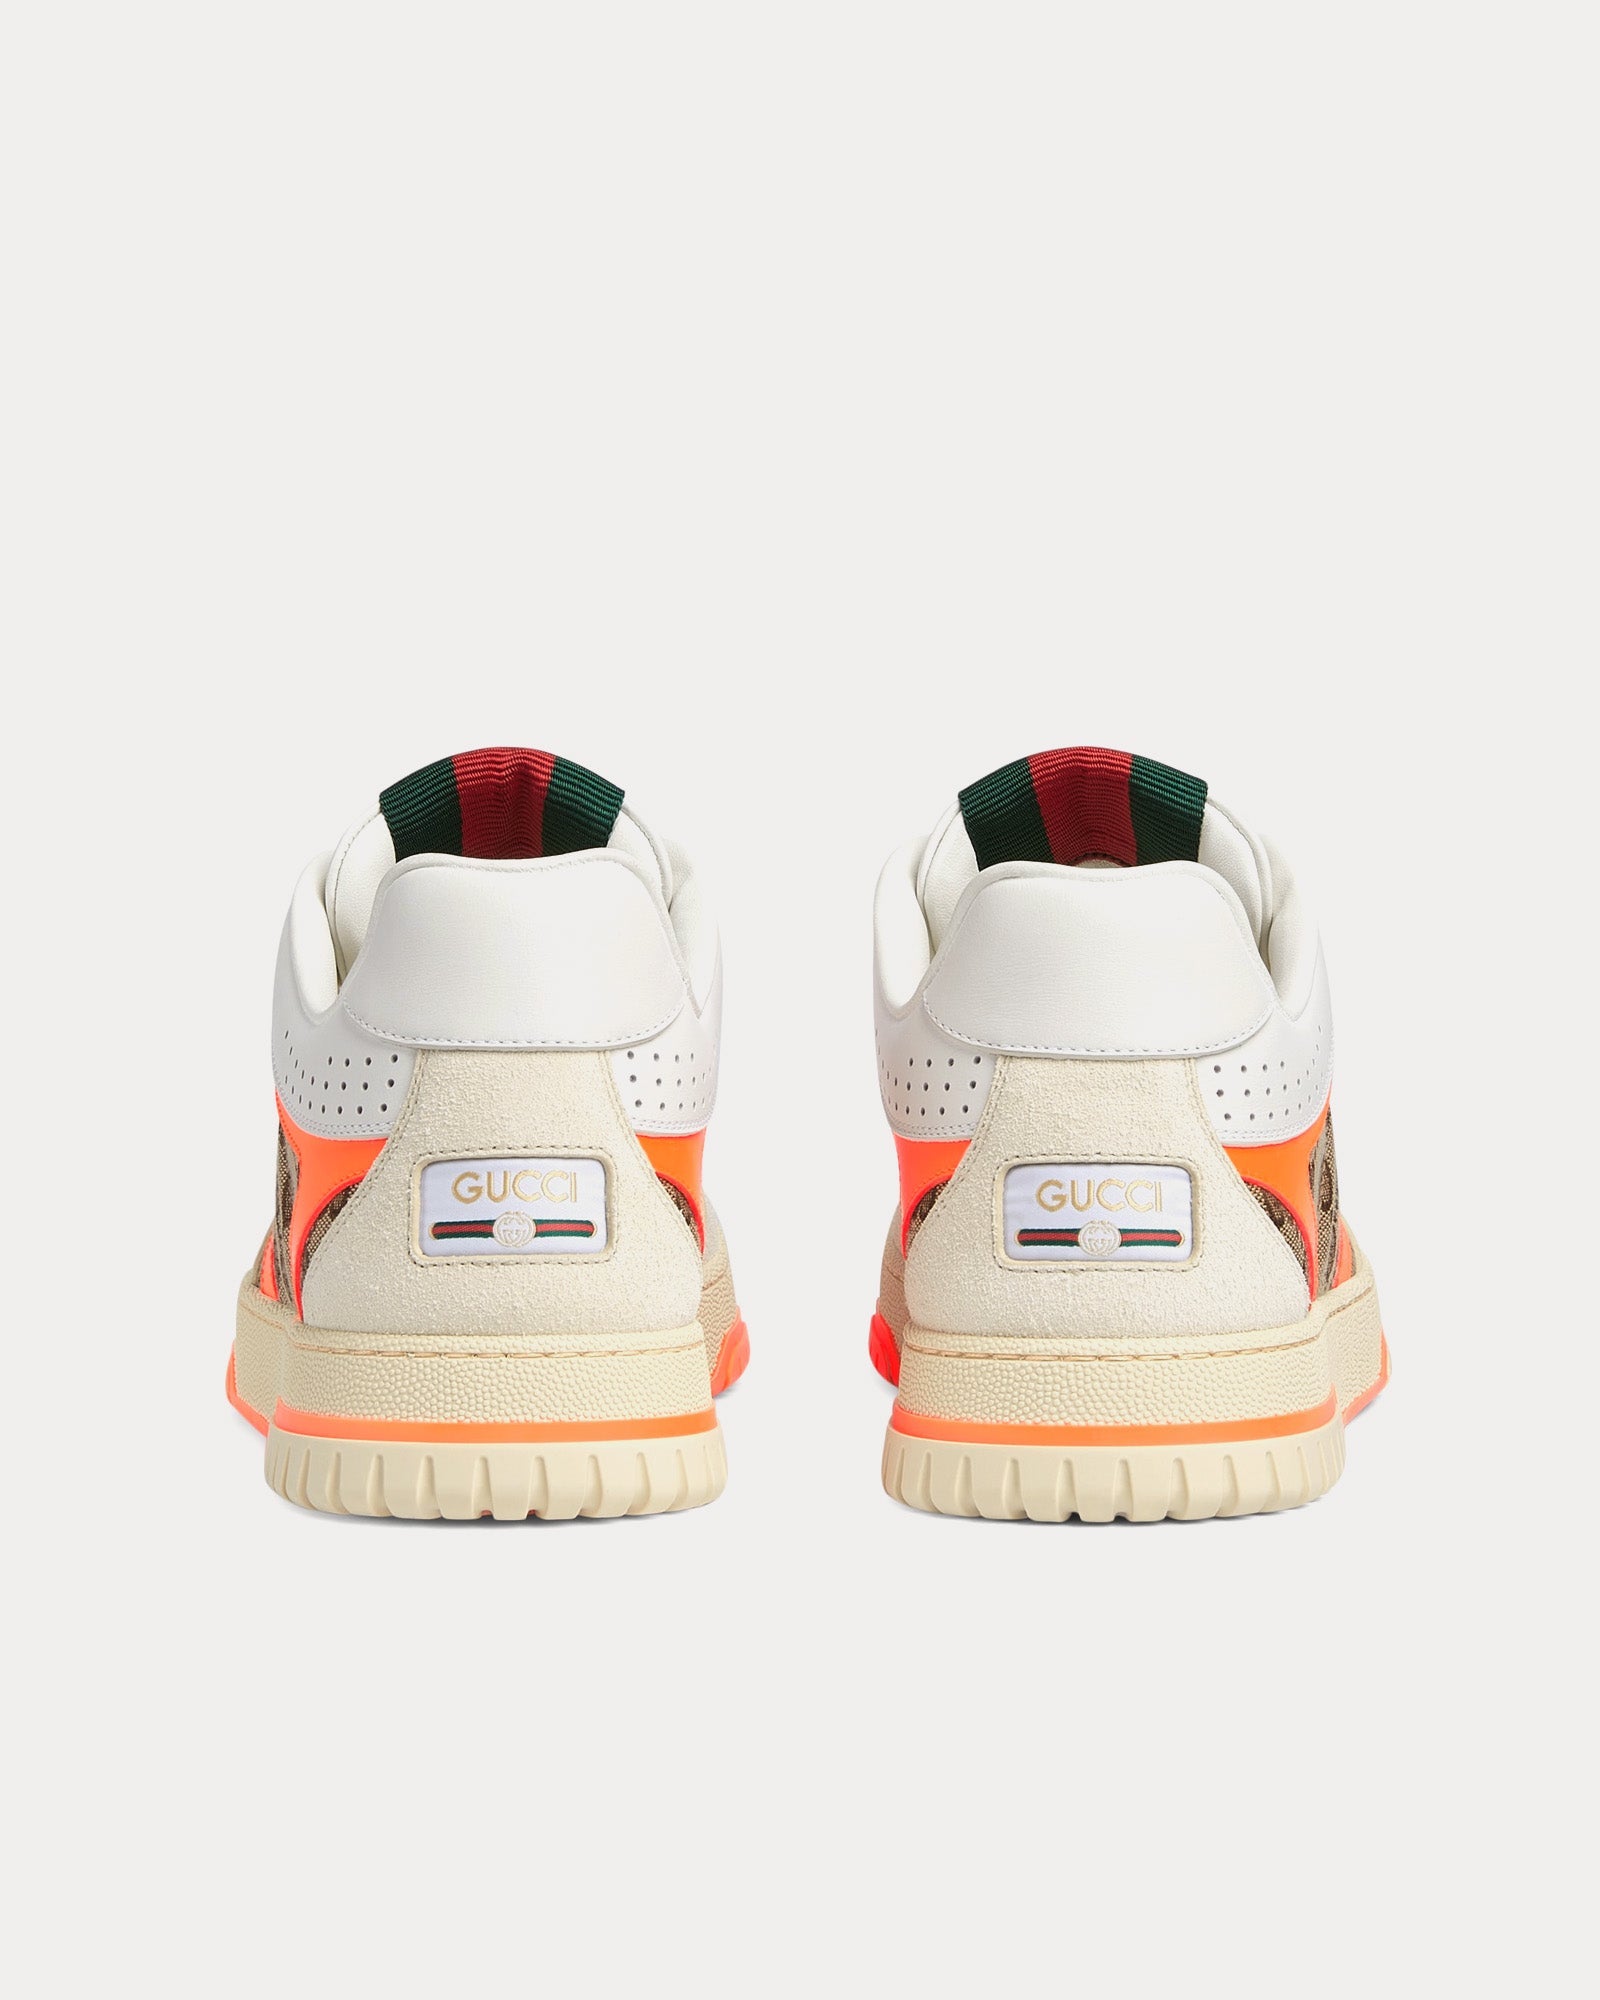 Gucci - Re-Web Leather with Original GG Canvas White / Orange Low Top Sneakers